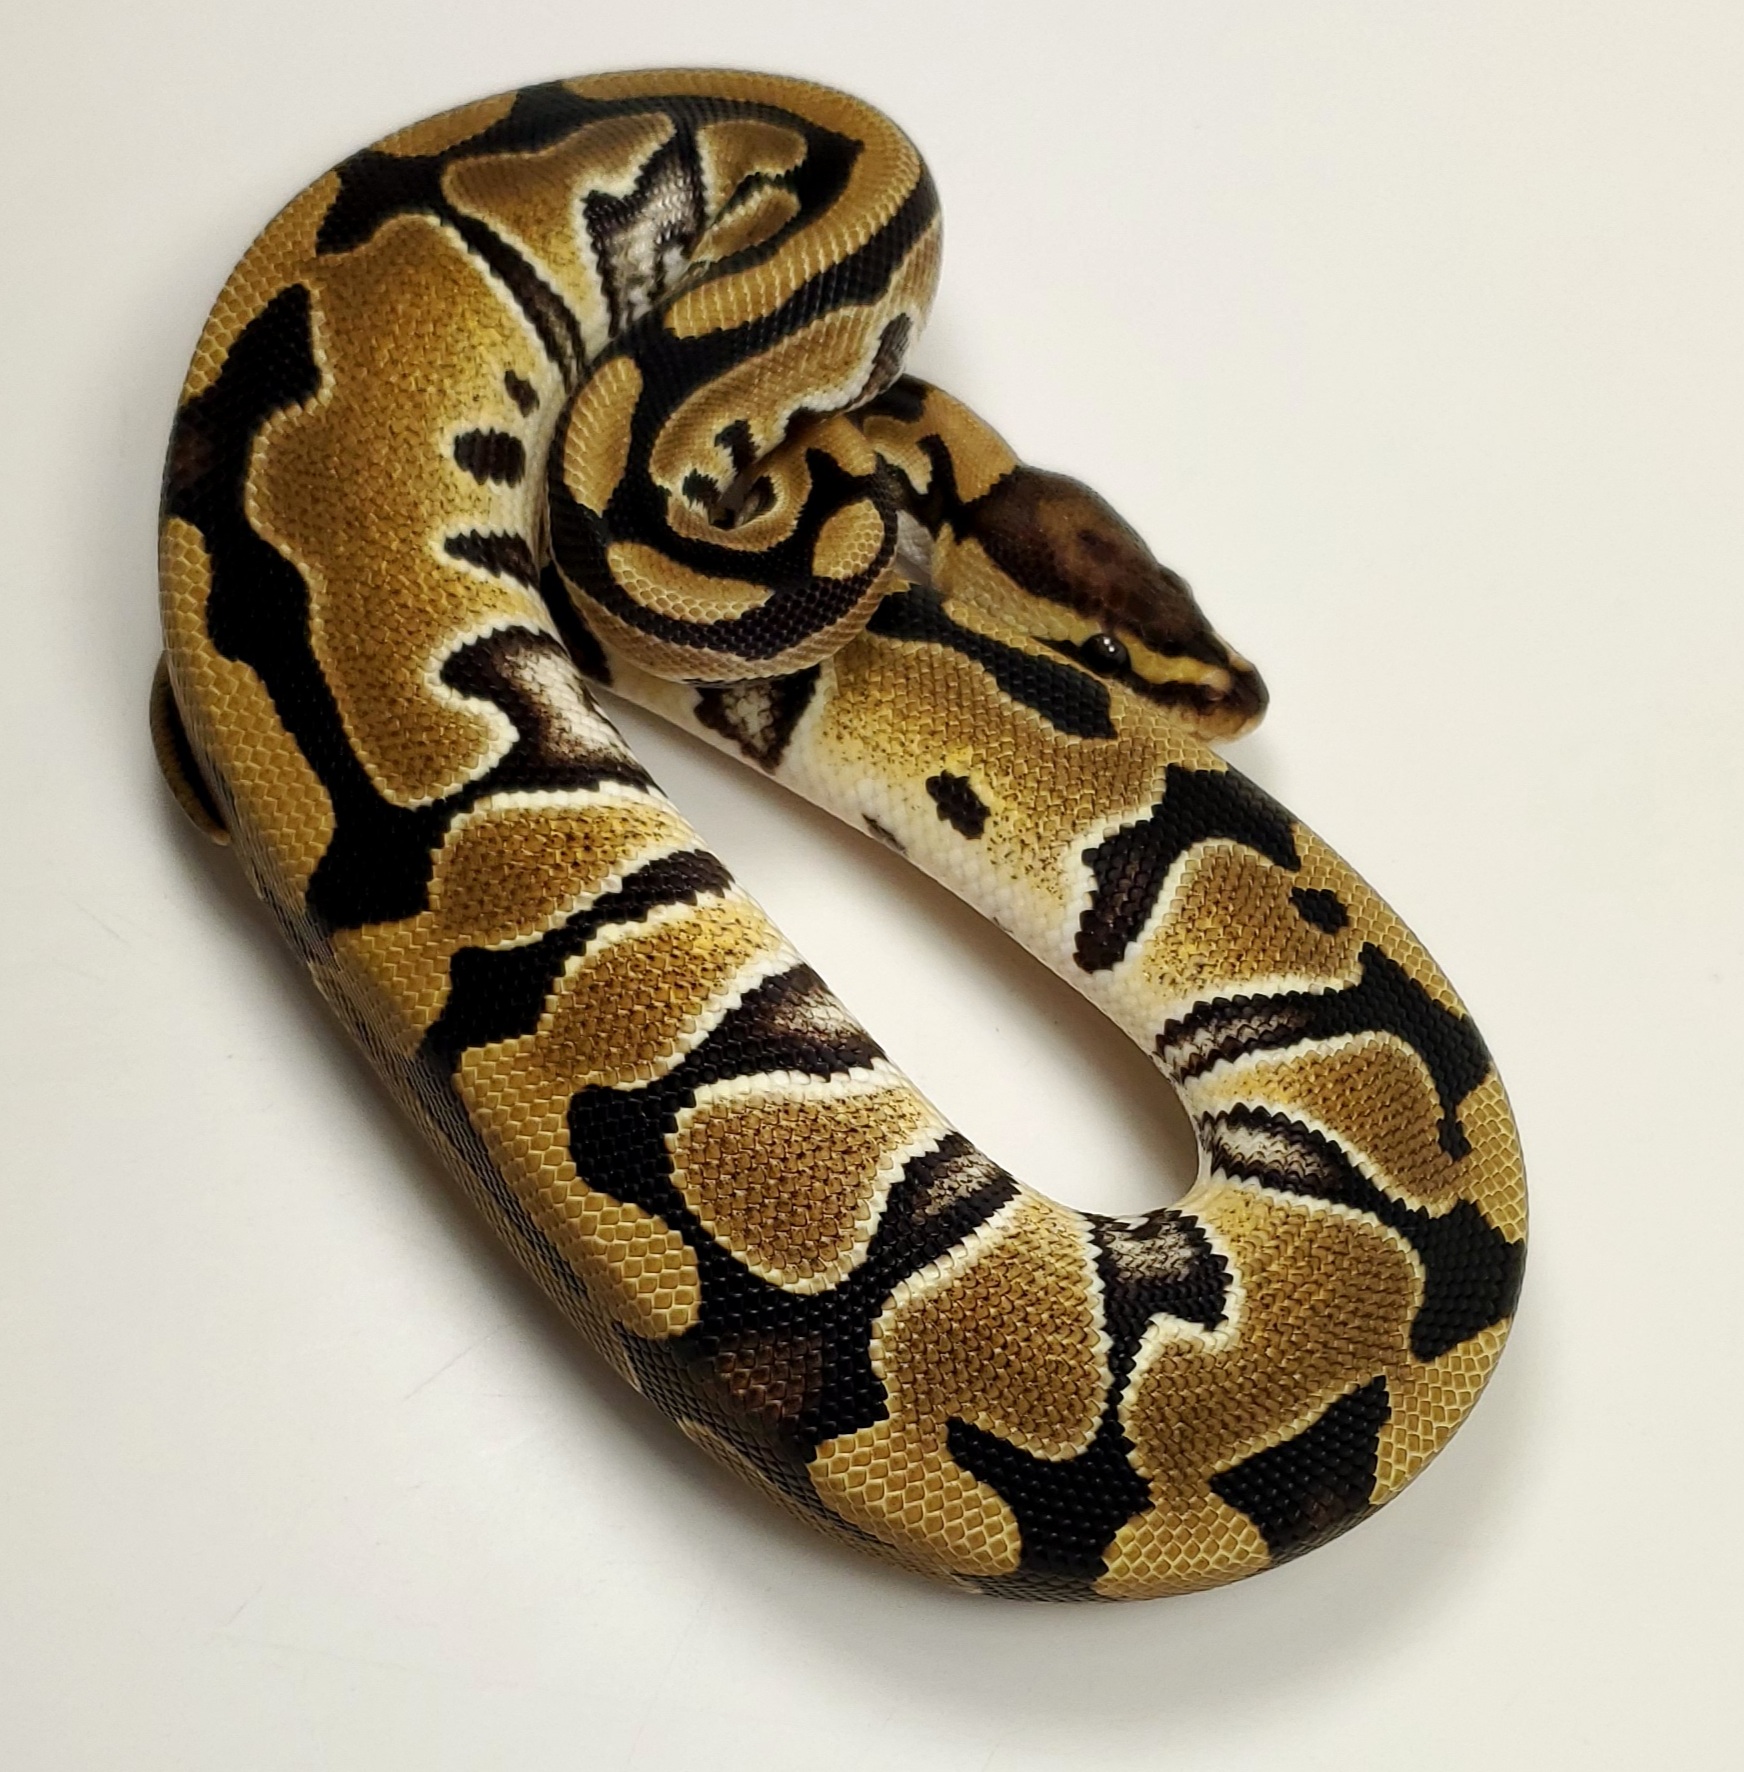 Cryptic Ball Python by Loxahatchee Herp Hatchery